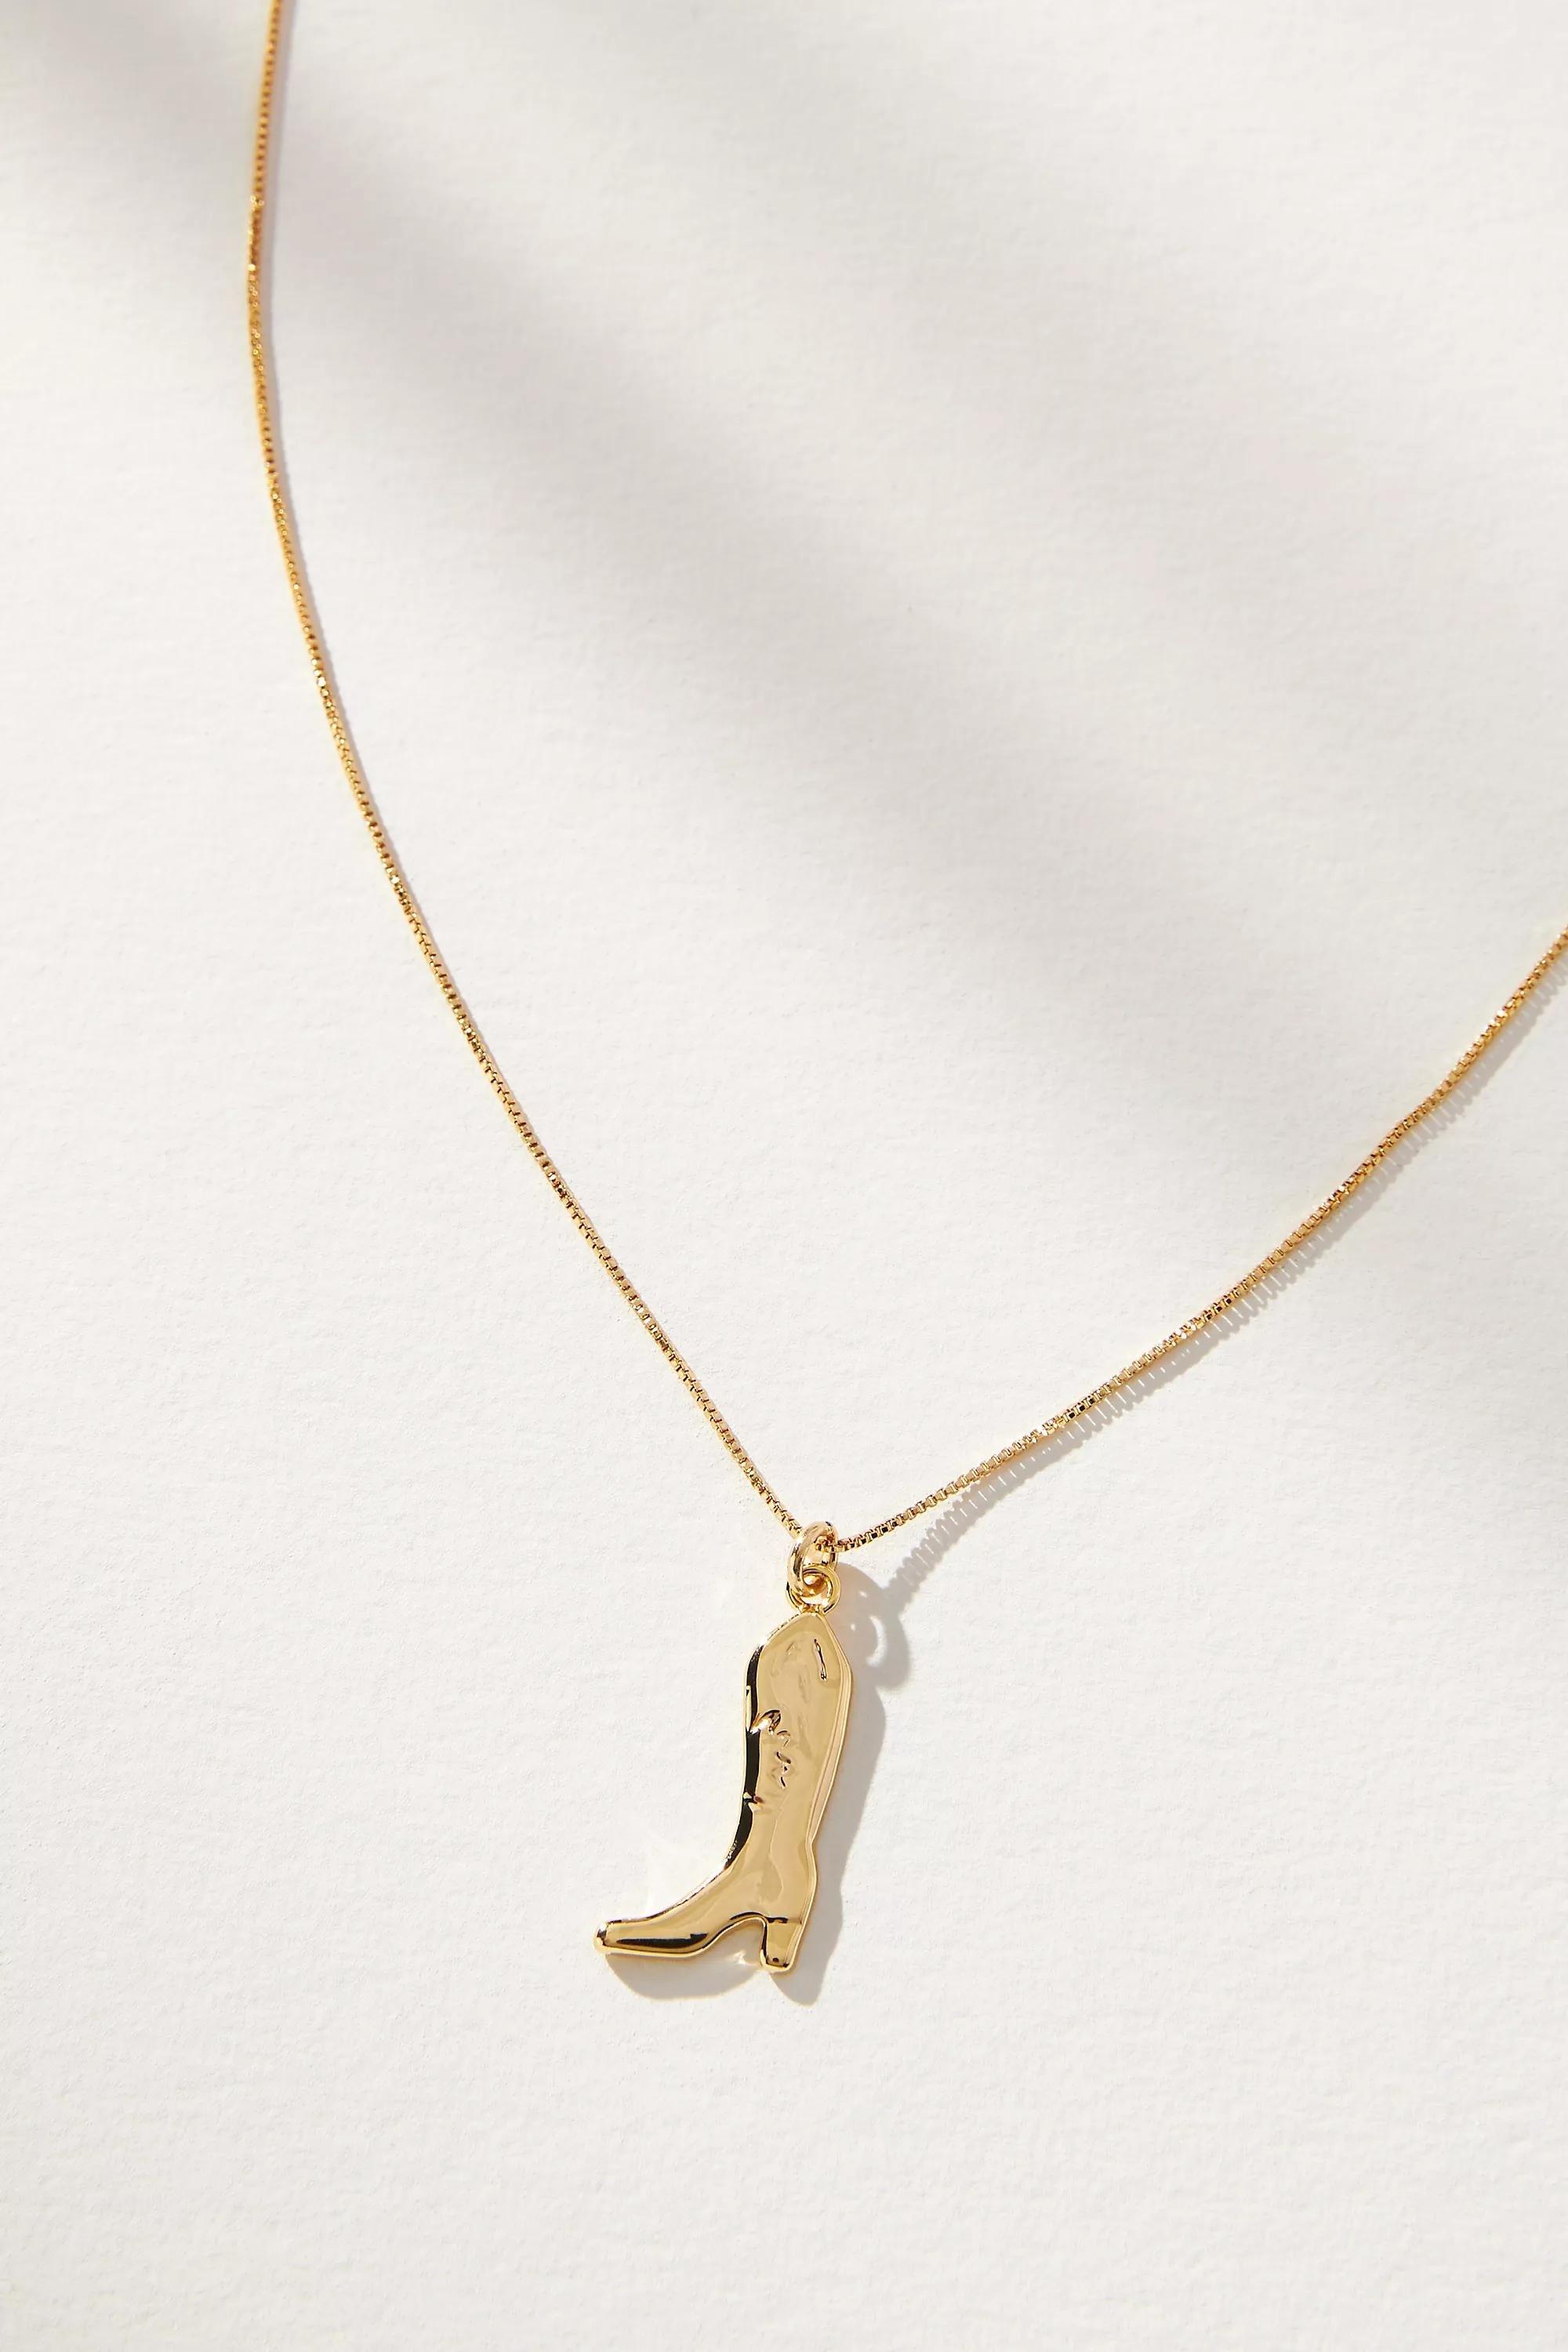 Anthropologie - Pave Cowboy Charm Necklace, Gold-Plated